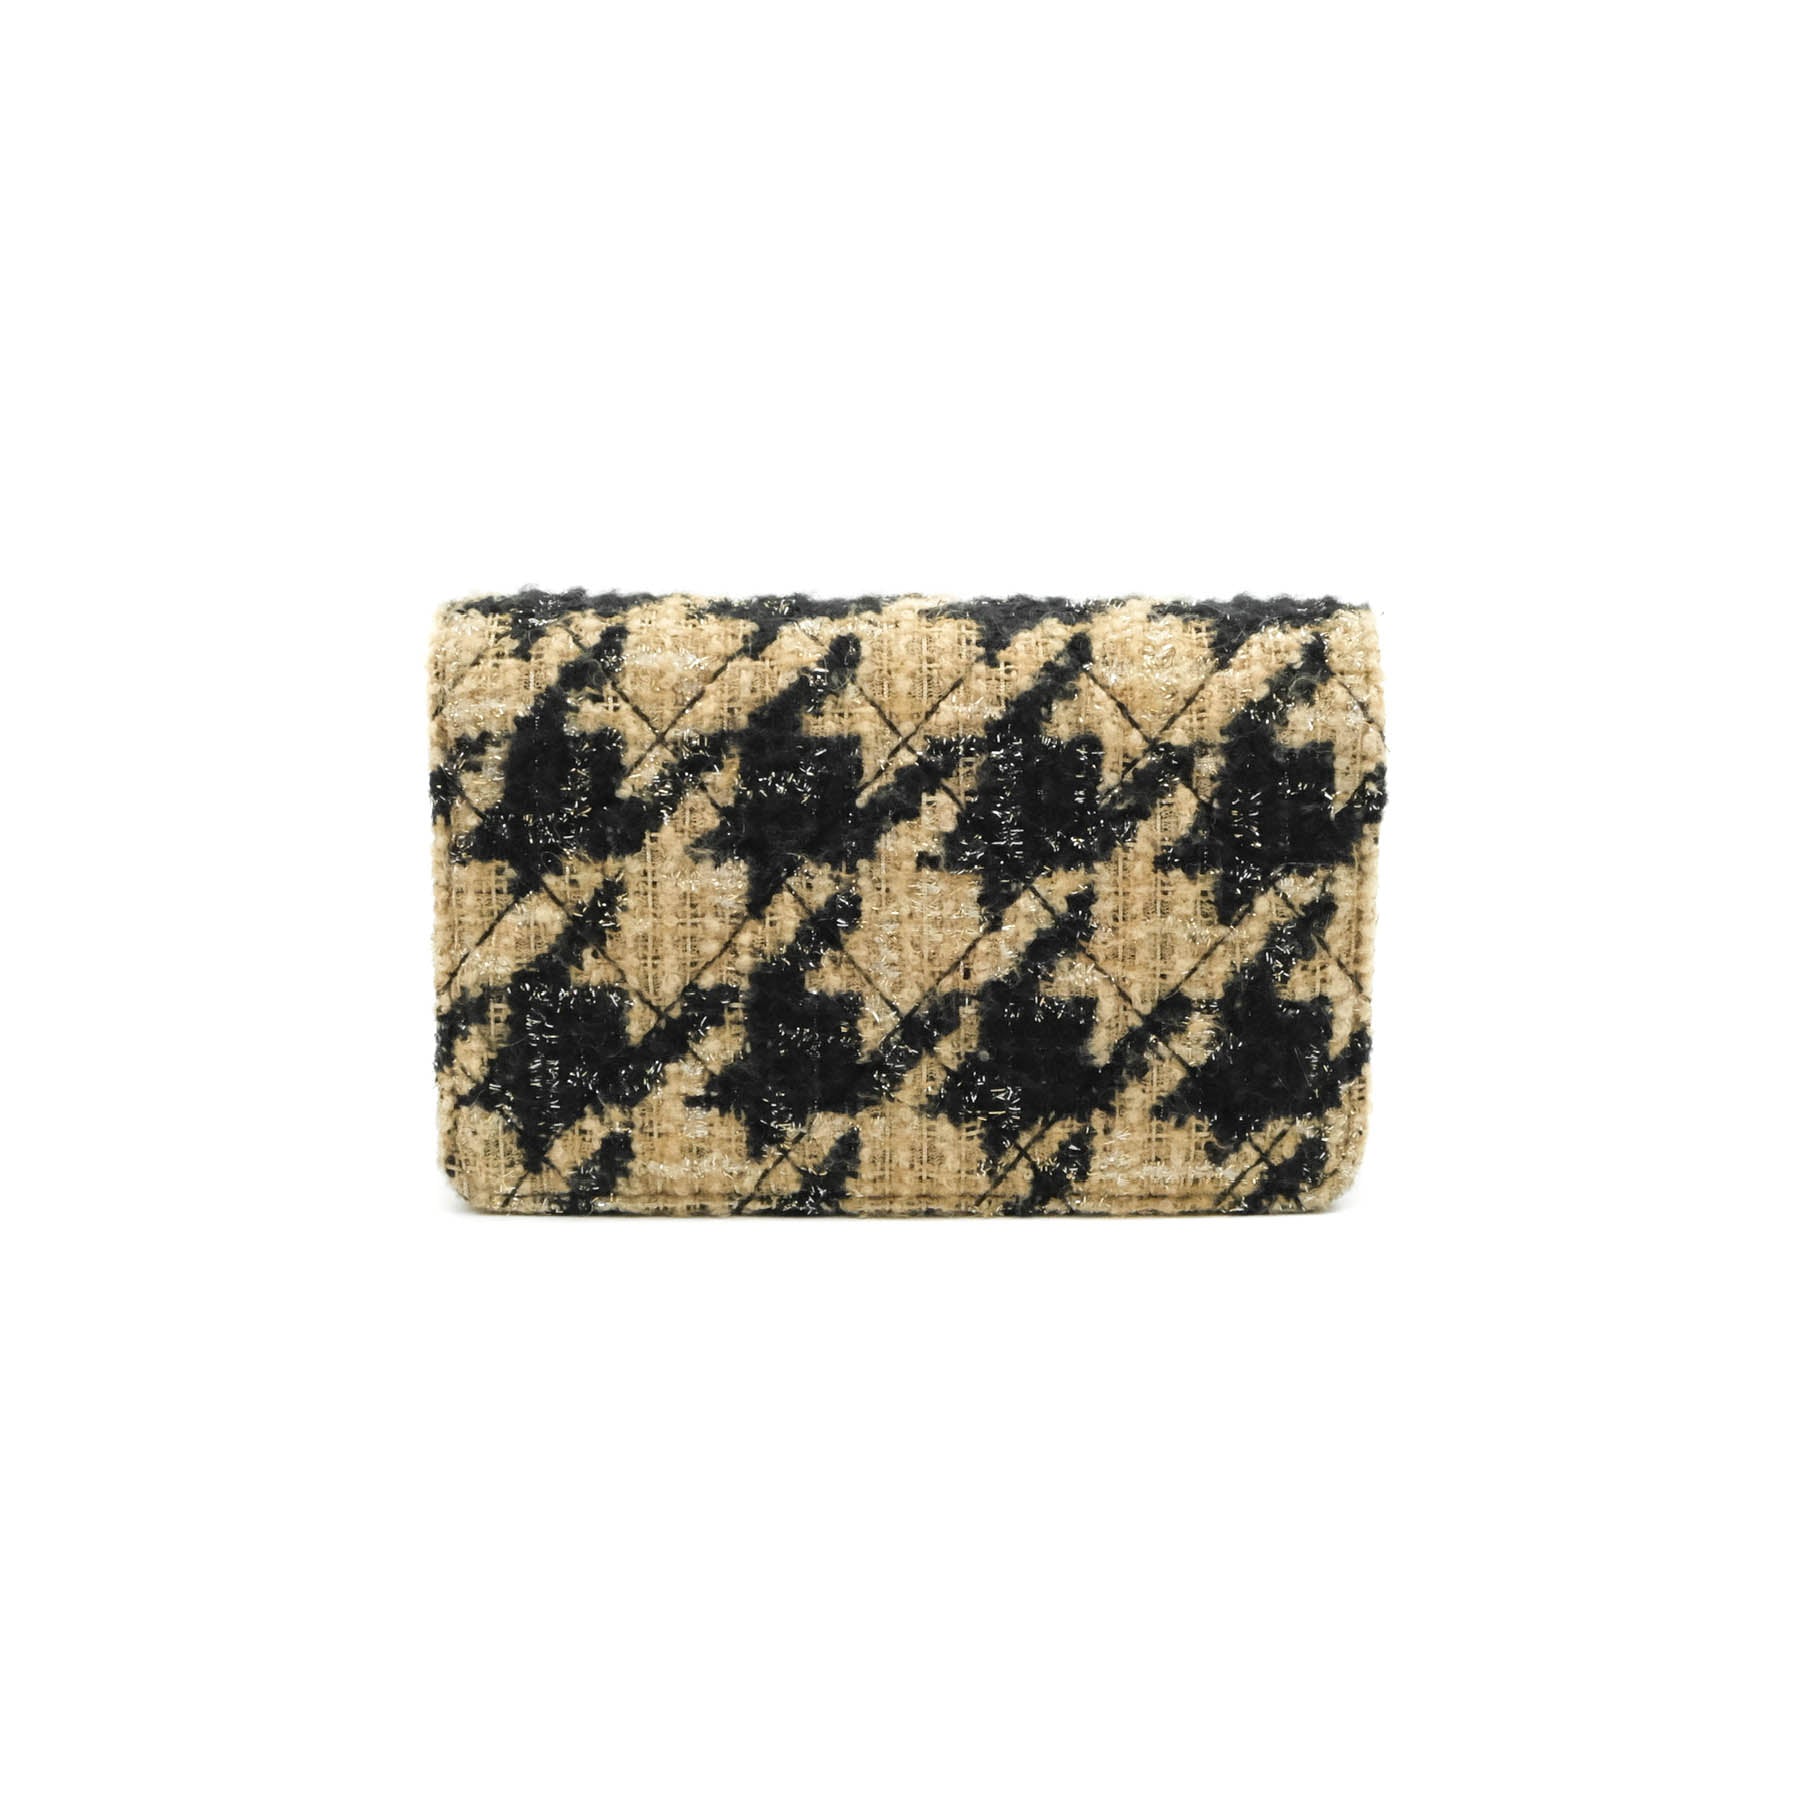 SOLD19 WOC Wallet On Chain Beige/Black Houndstooth in 2023